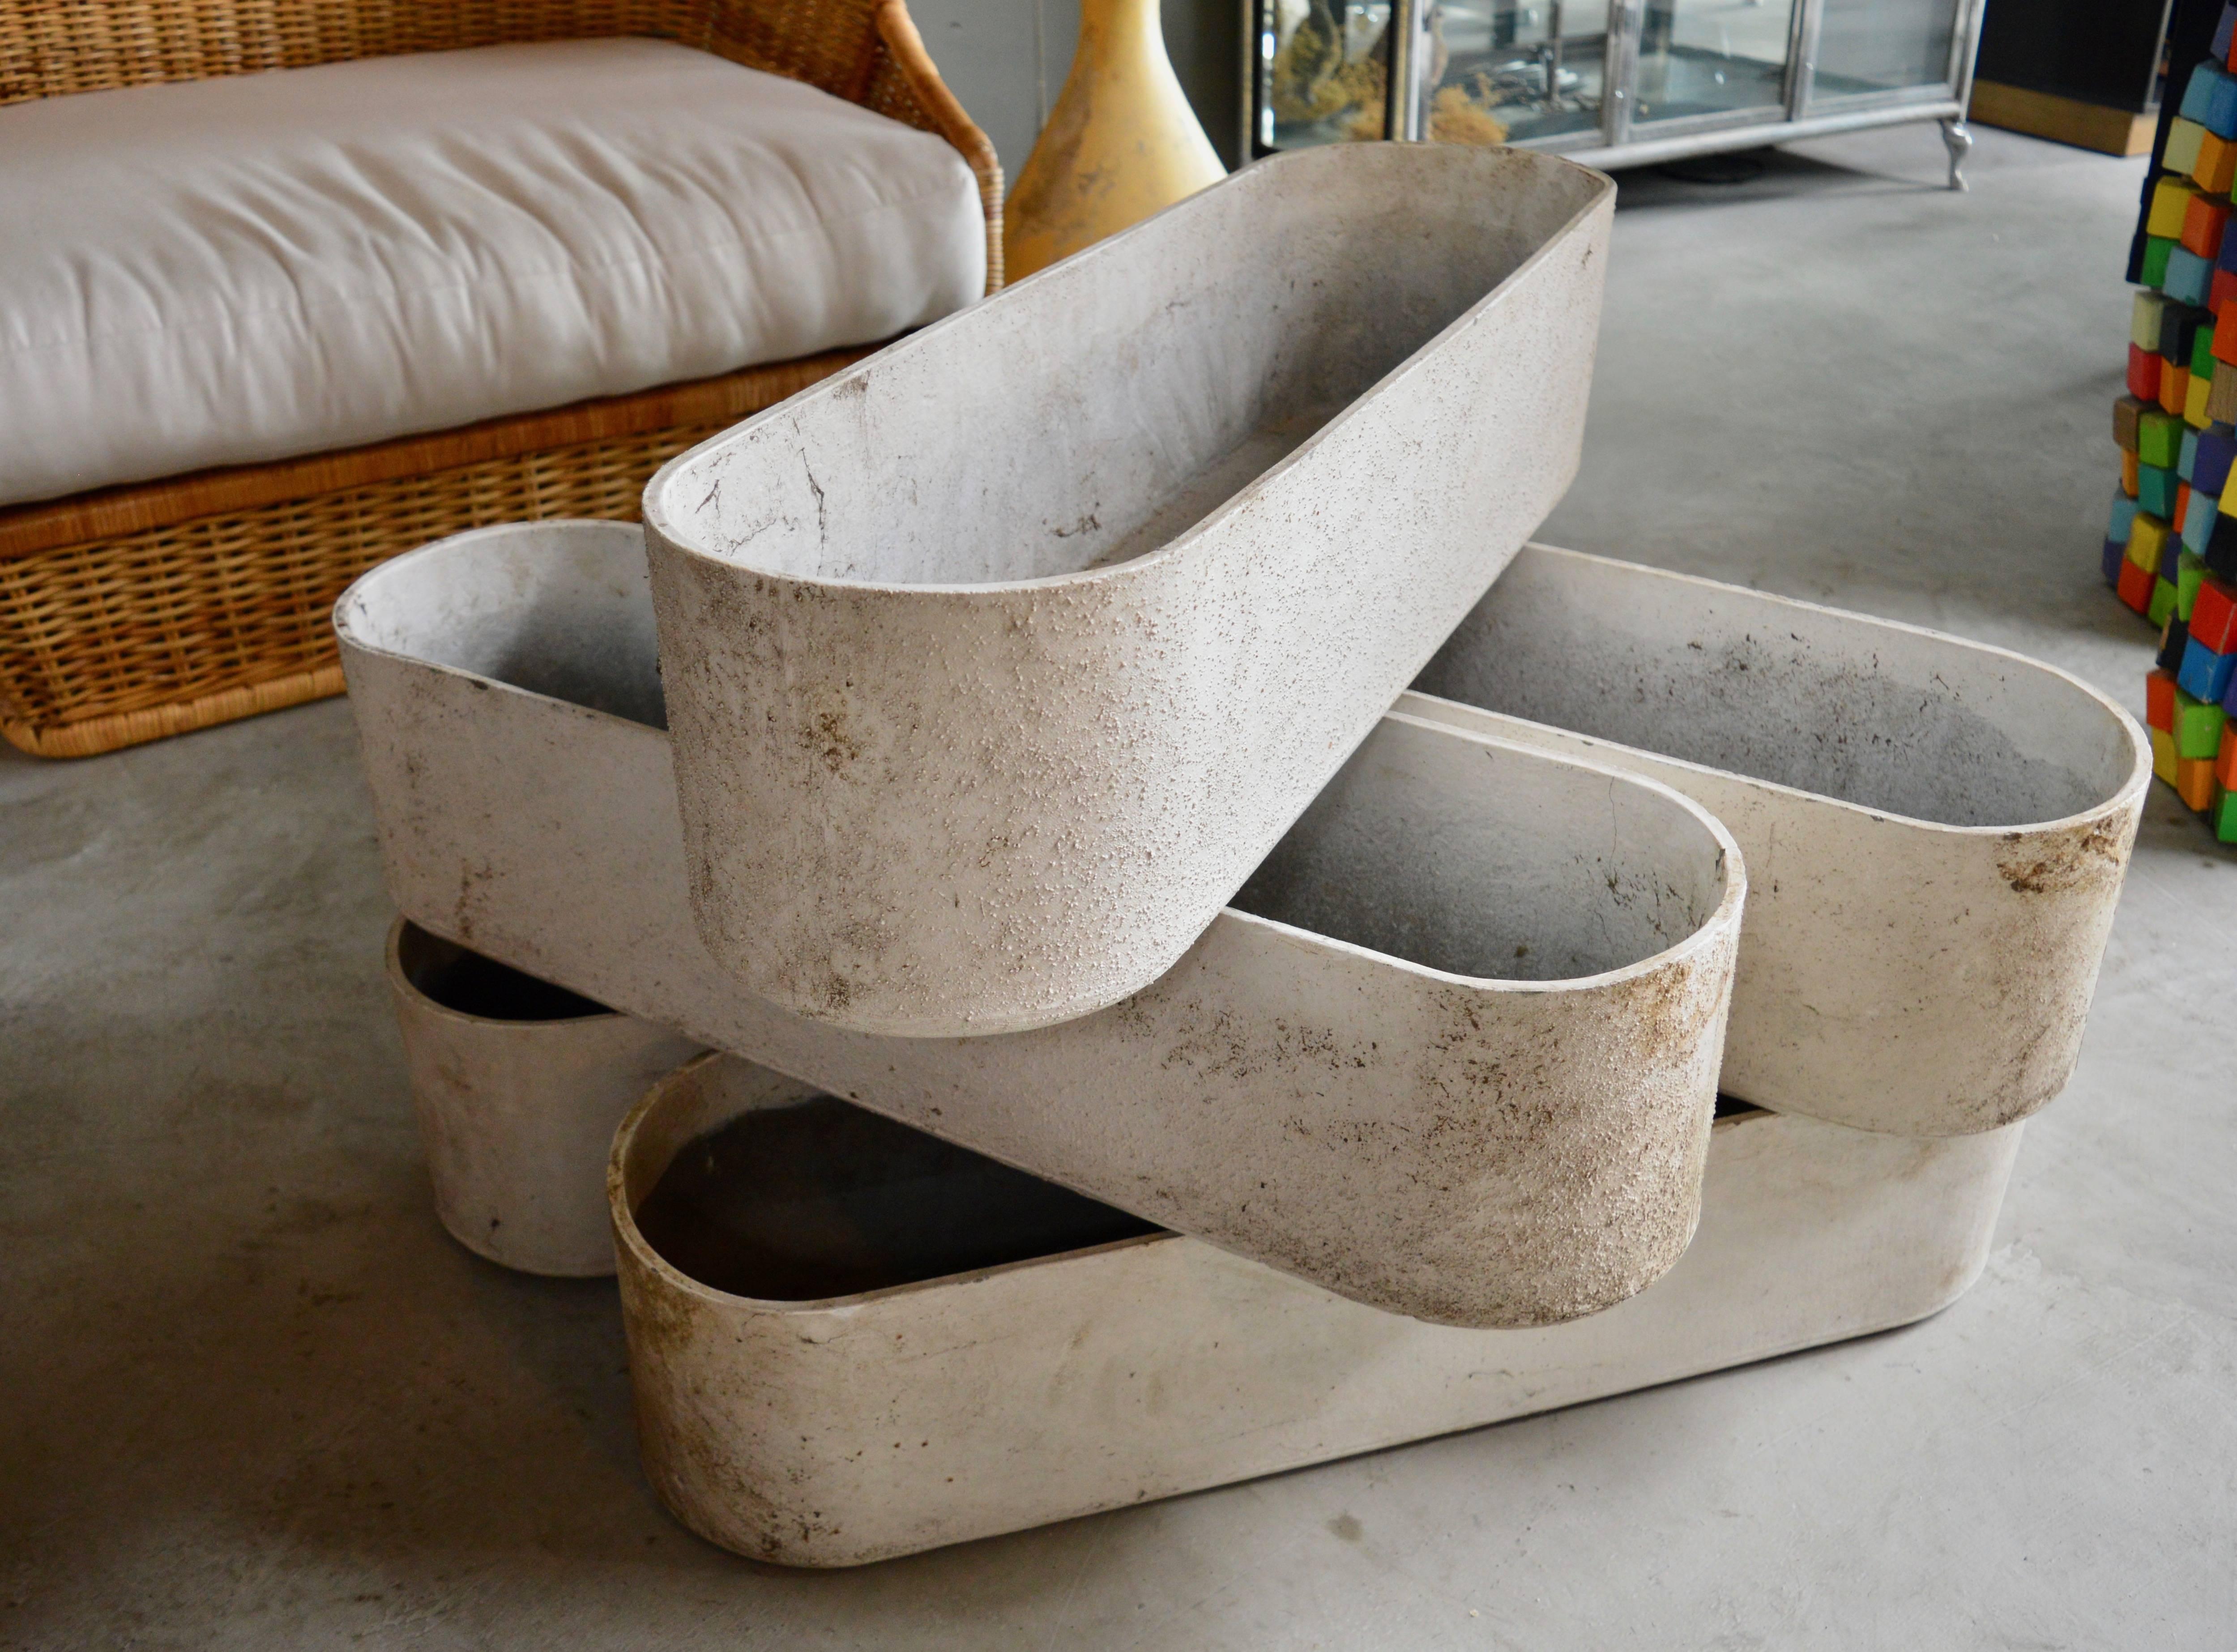 Fantastic ovular planters by Willy Guhl. Great for window sills and narrow walkways. Only one still available. 

